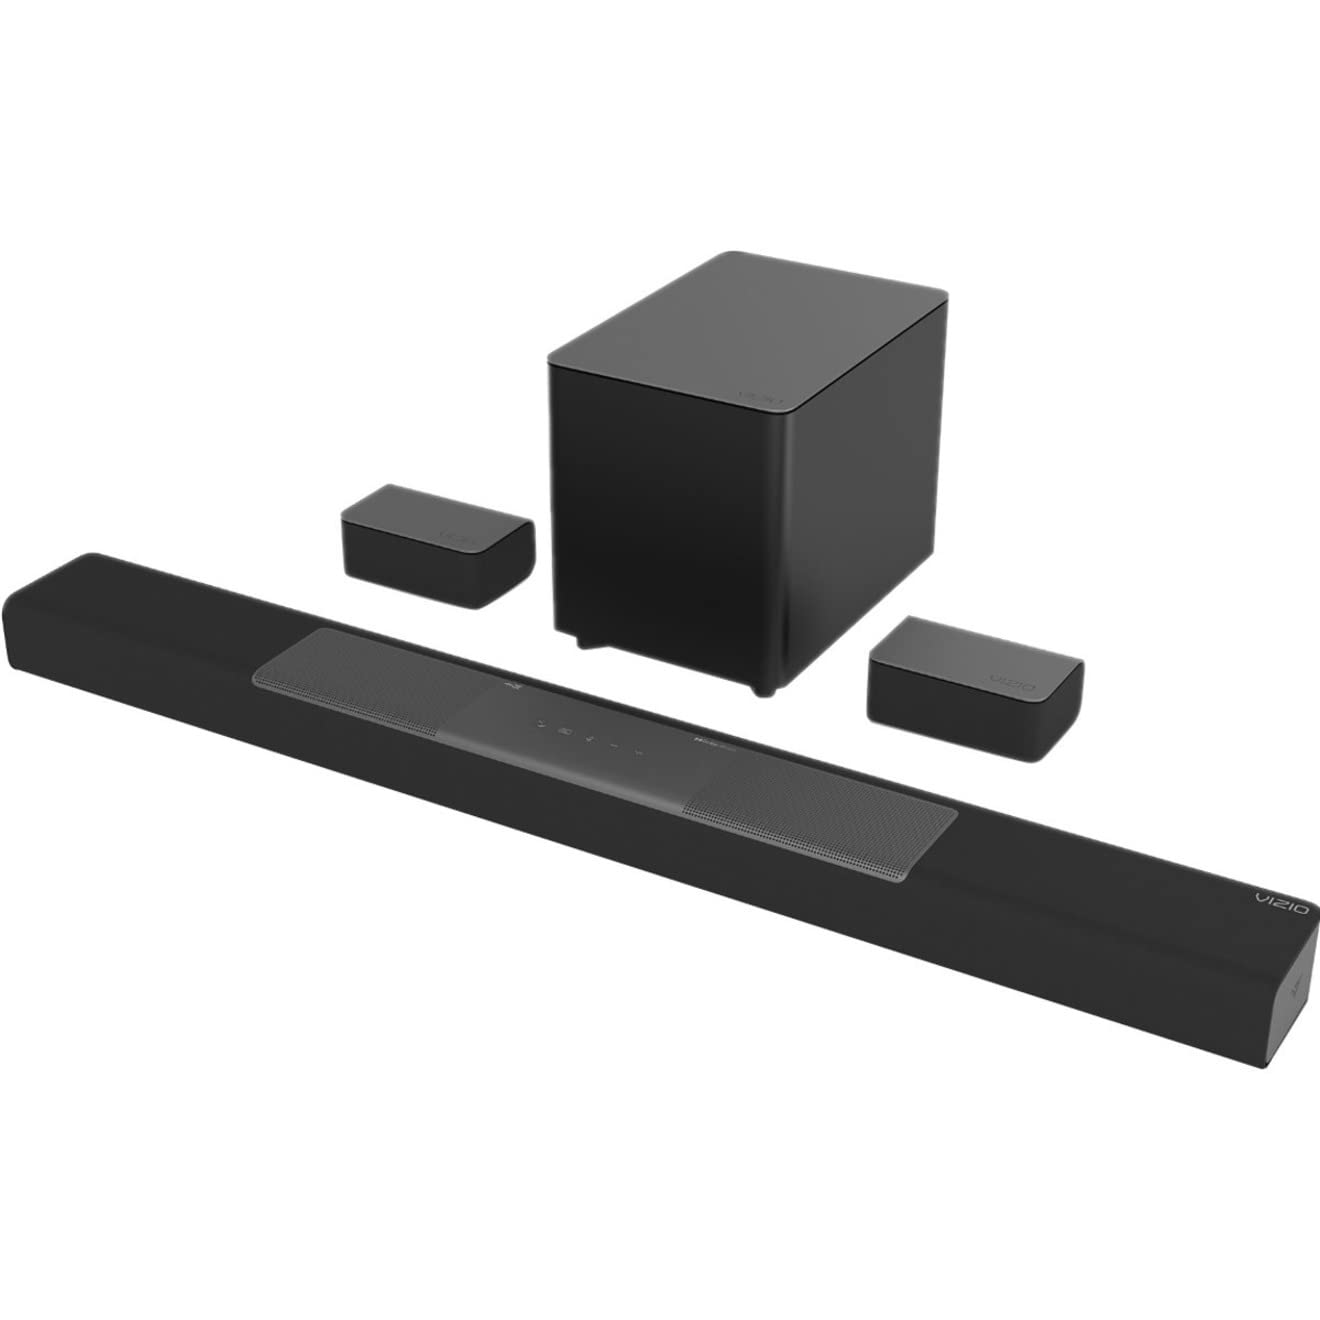 VIZIO M-Series 5.1.2 Immersive Sound Bar with Dolby Atmos, DTS:X, Bluetooth, Wireless Subwoofer, Voice Assistant Compatible, Includes Remote Control - M512a-H6 - $350